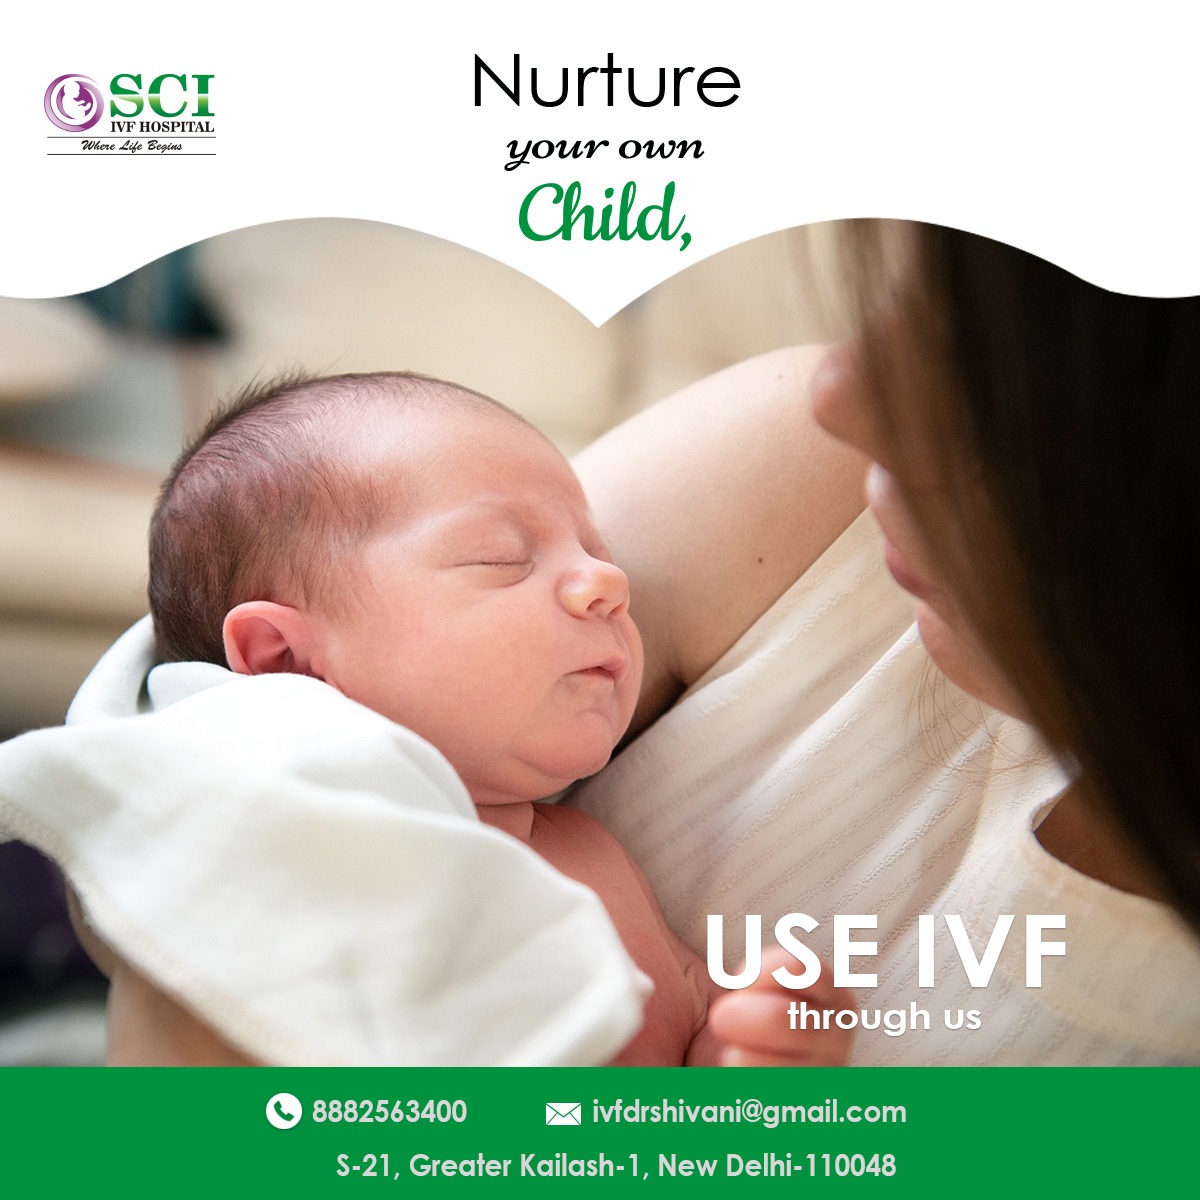 Nurture your own child, contact us for IVF treatment service. Call today to our fertility experts and specialists to understand the procedure of IVF Treatment.

#ivf #fertility #infertility #ivftreatment #ivfcost #ivfclinics #ivfcentre #ivfpregnancy #ivfdoctors #ivfhospital